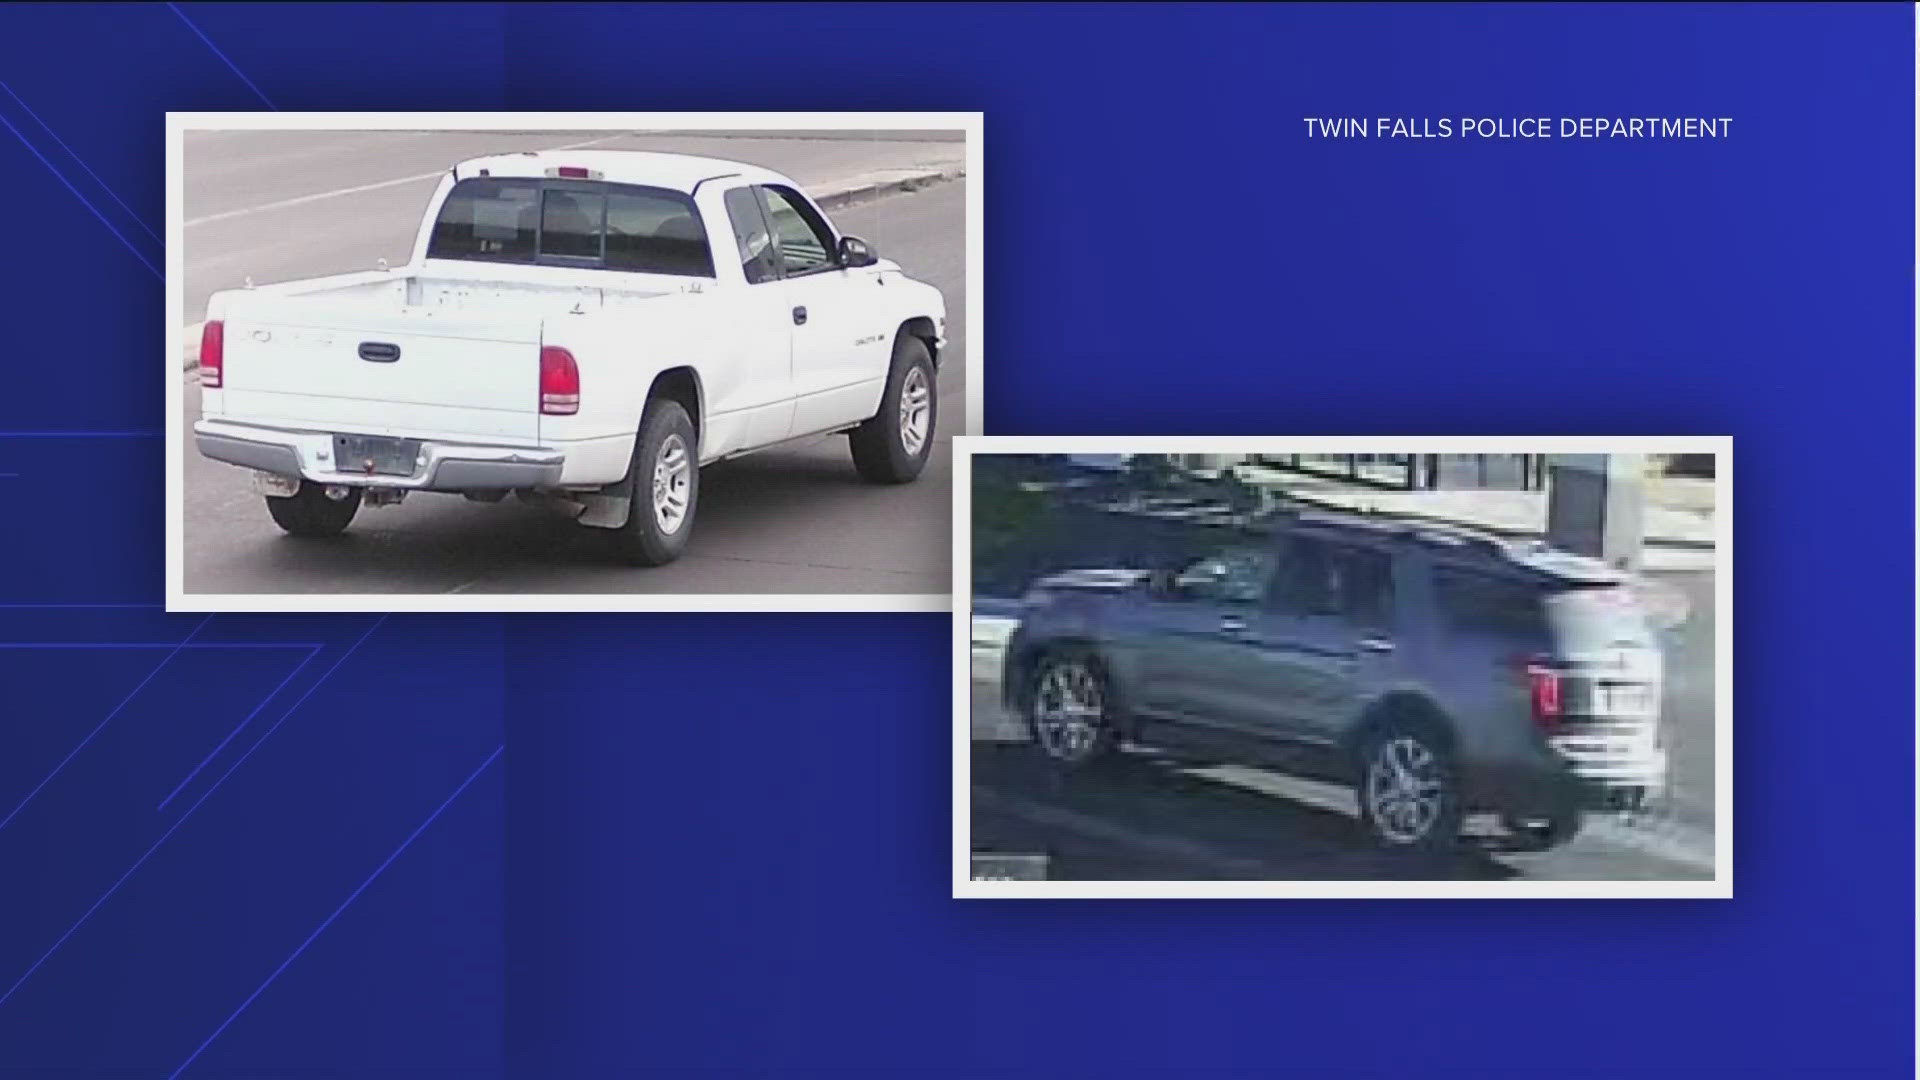 Police said they are searching for a two-door white Dodge pickup with no plates and a silver Ford Explorer with chrome door handles and chrome/silver wheels.